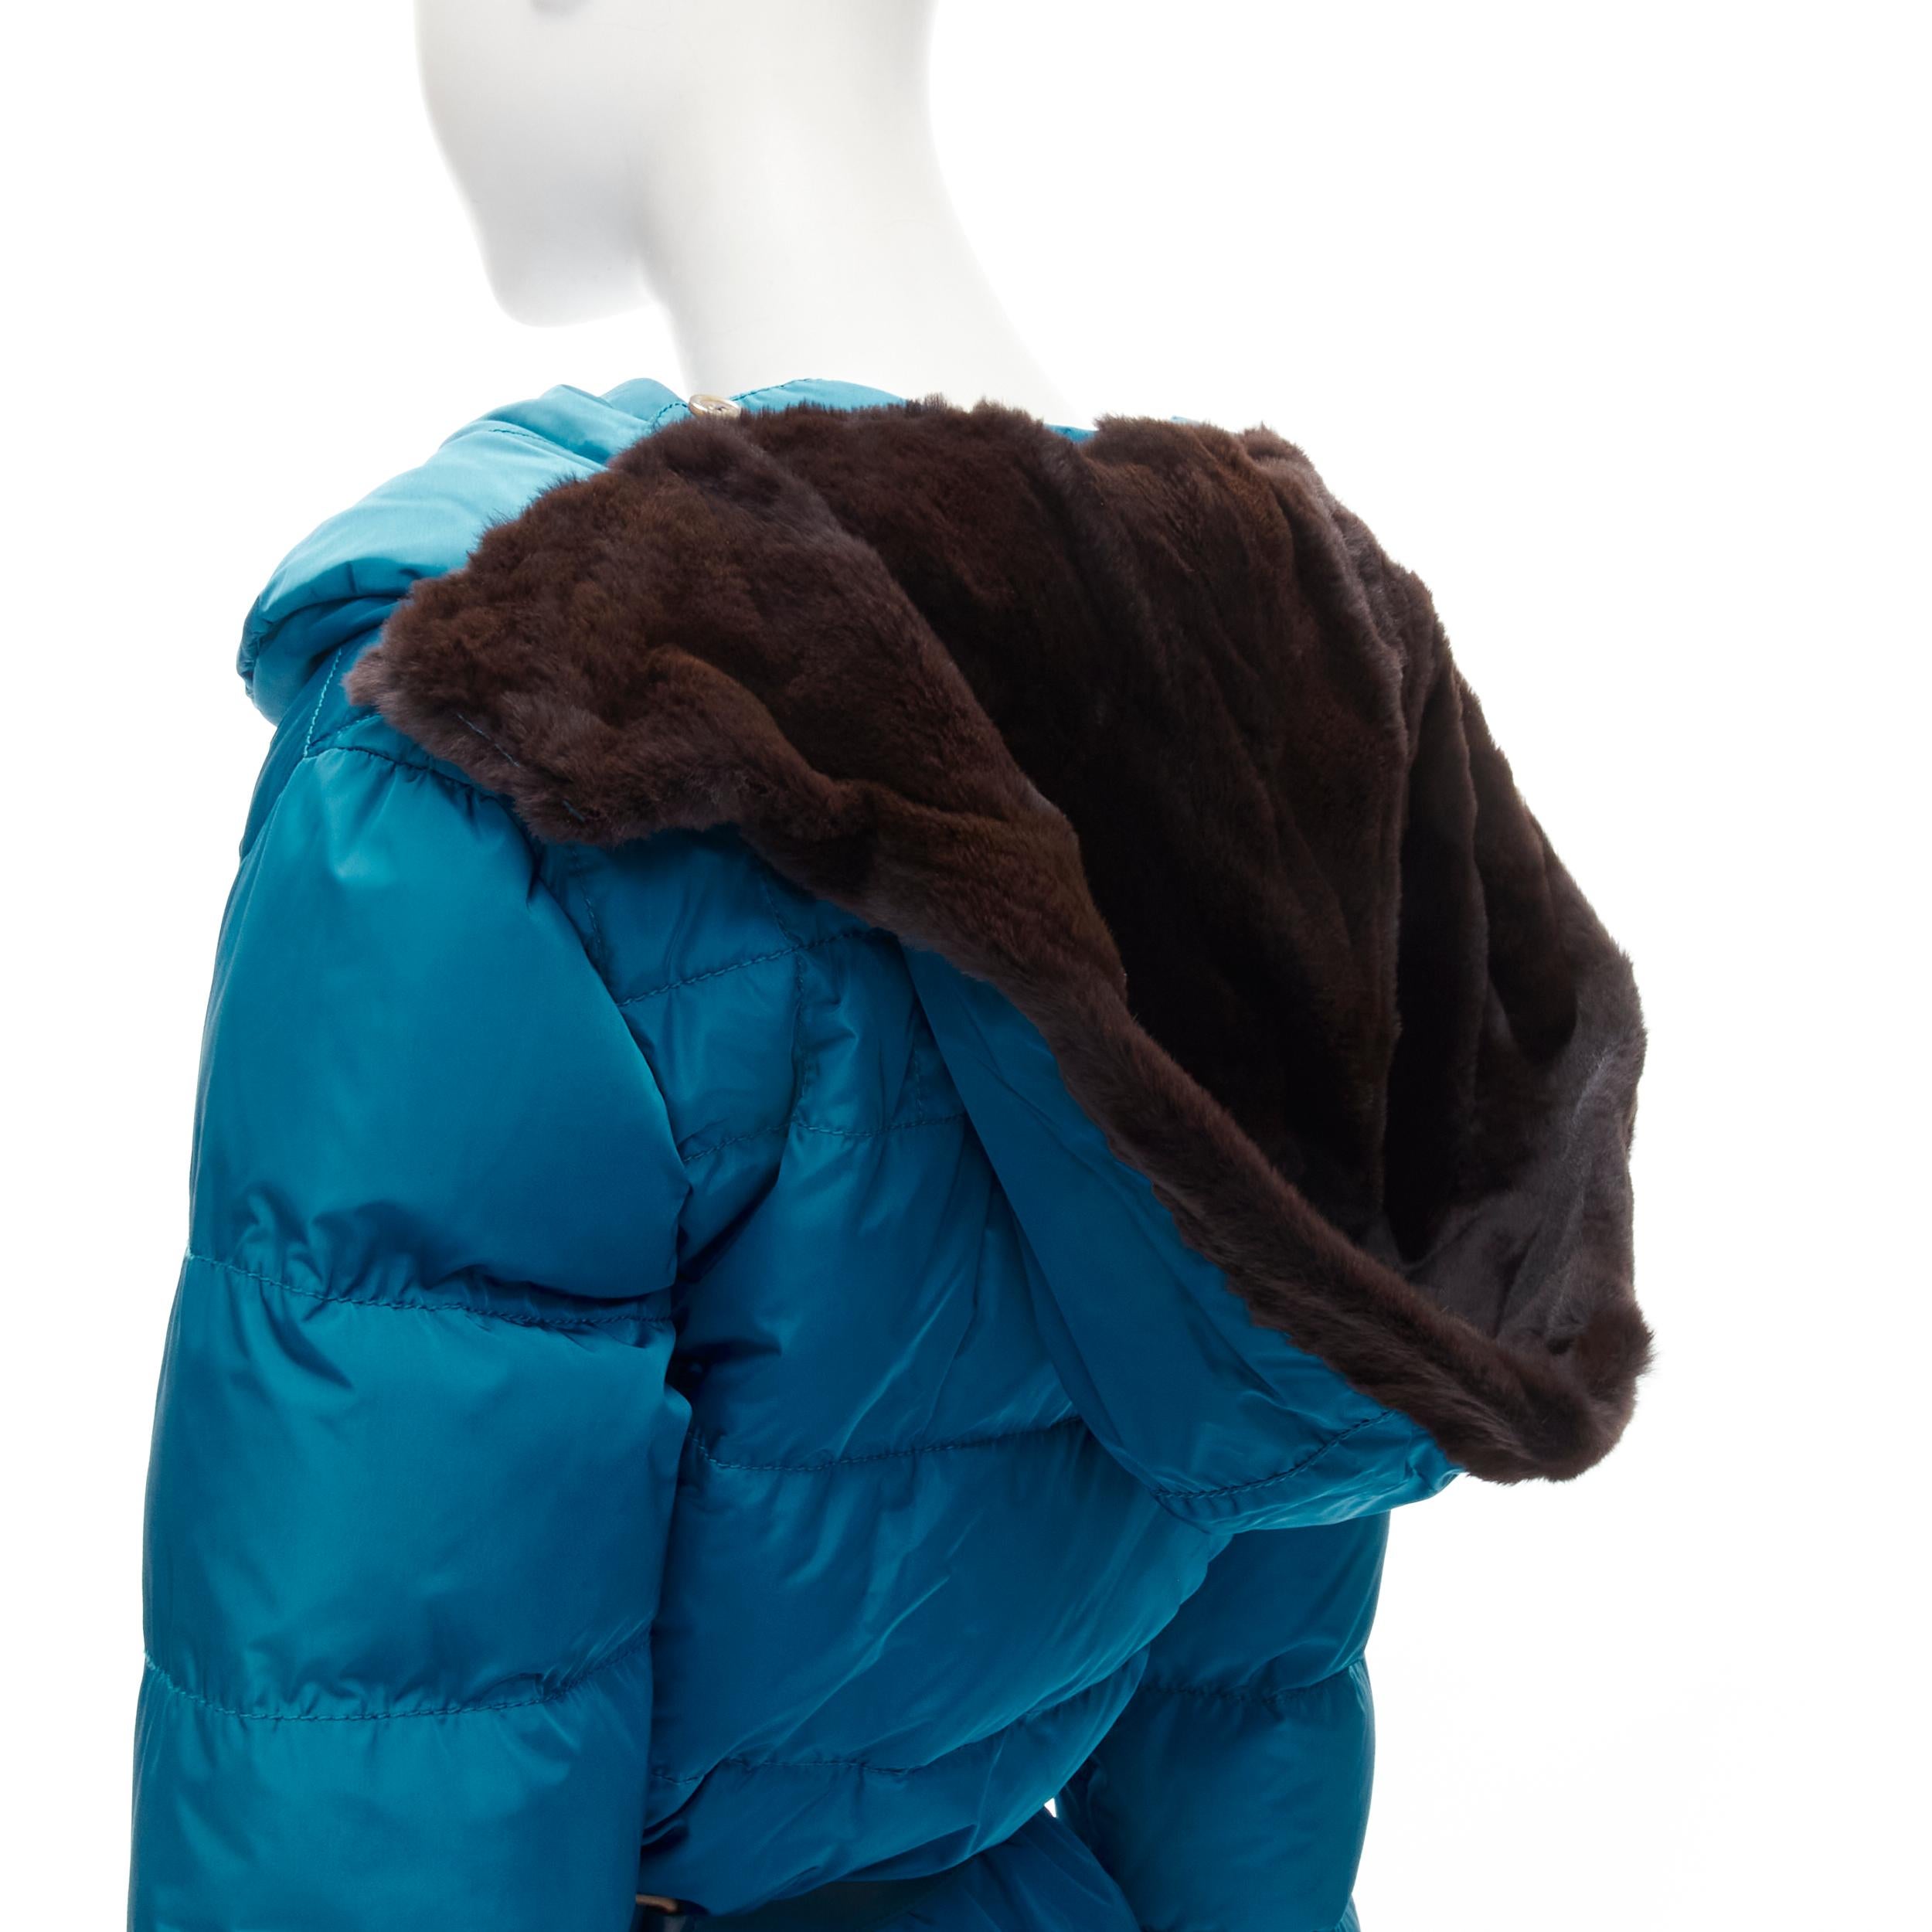 LOUIS VUITTON blue Real Goose down fur lined hood belted puffer jacket FR34 XS
Brand: Louis Vuitton
Designer: Marc Jacobs
Material: Nylon
Color: Blue
Pattern: Solid
Closure: Button
Extra Detail: Concealed zip and brass-tone logo signed button loop